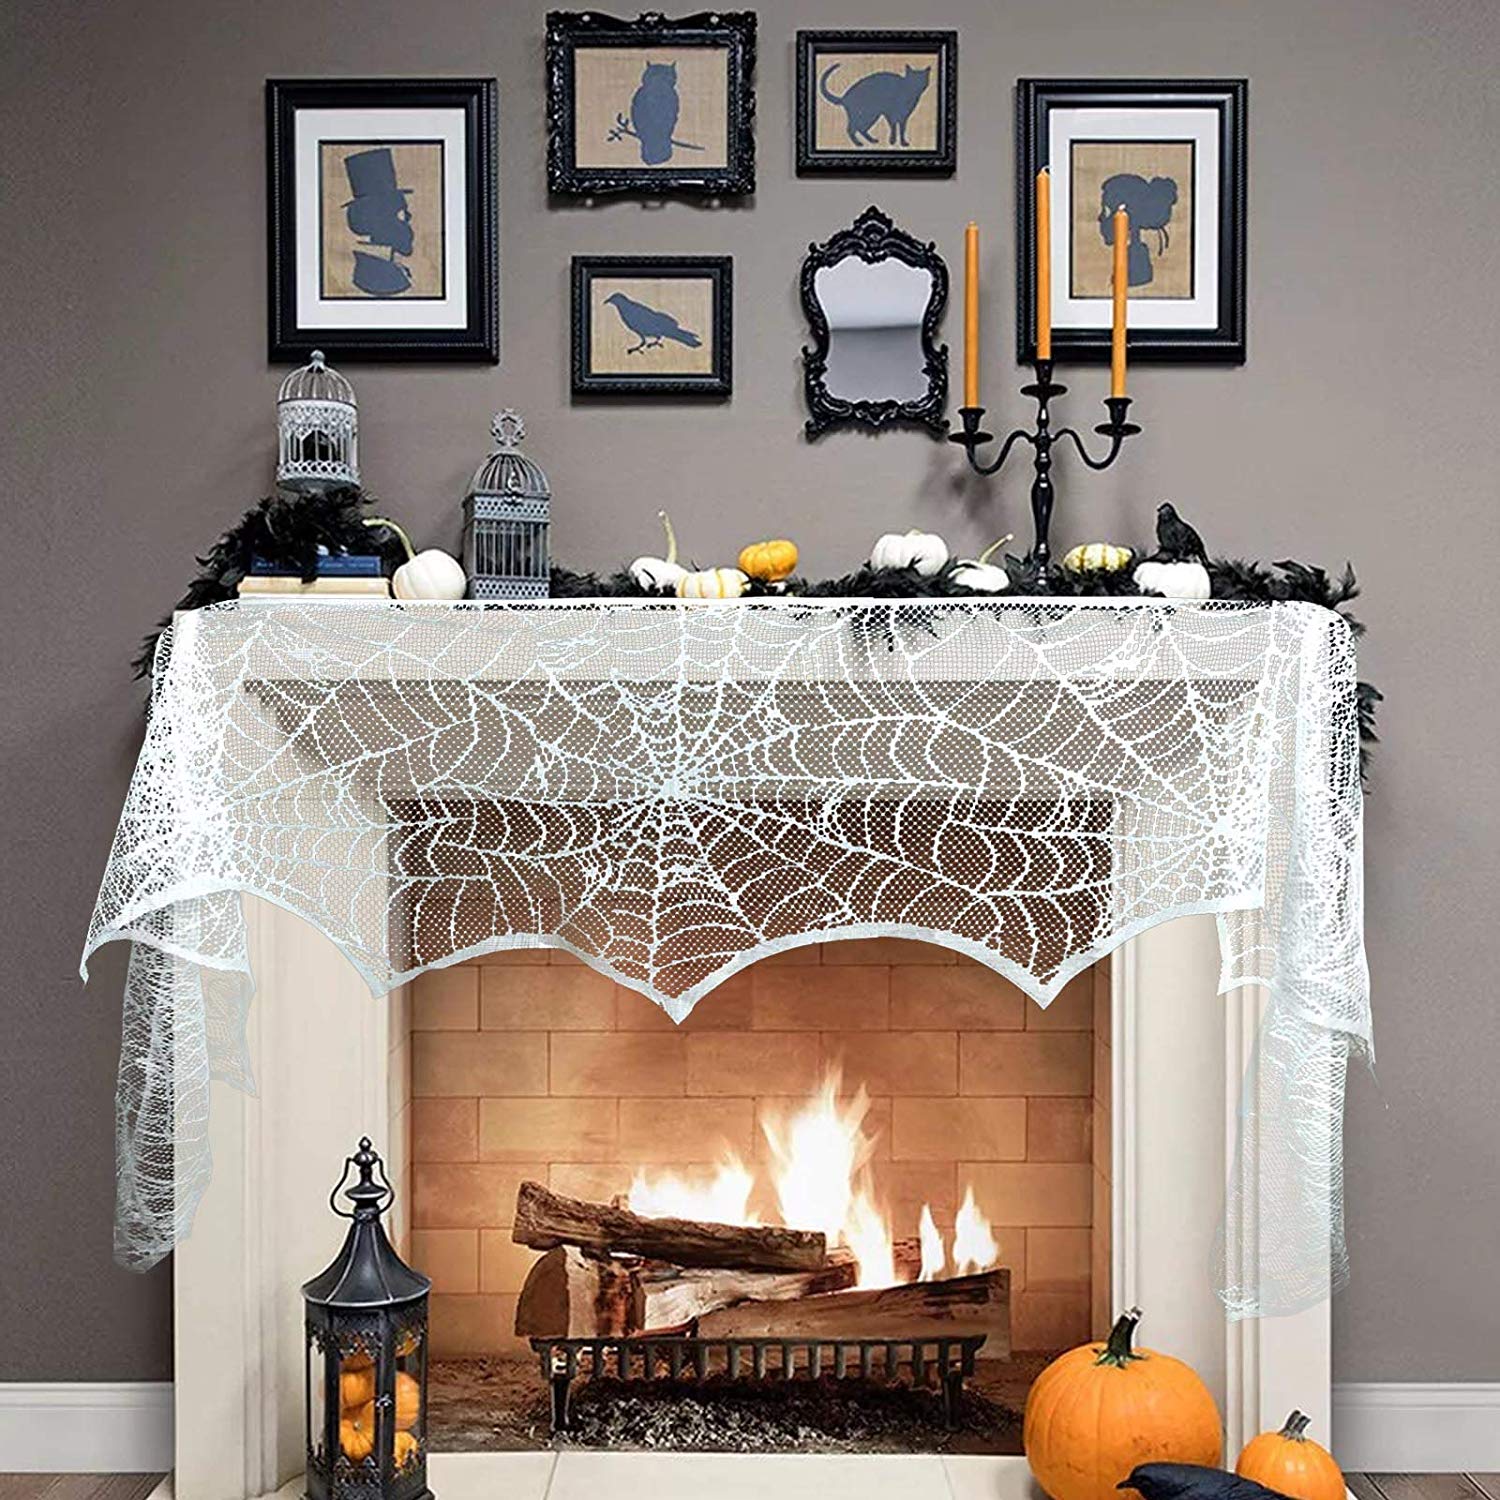 Fireplace Xtrordinair Prices New Vlovelife 18 X 96 Halloween Decorations Spiderweb Mantel Scarf Polyester Cobweb Fireplace Mantel Scarf for Halloween Party Festival Scary Movie